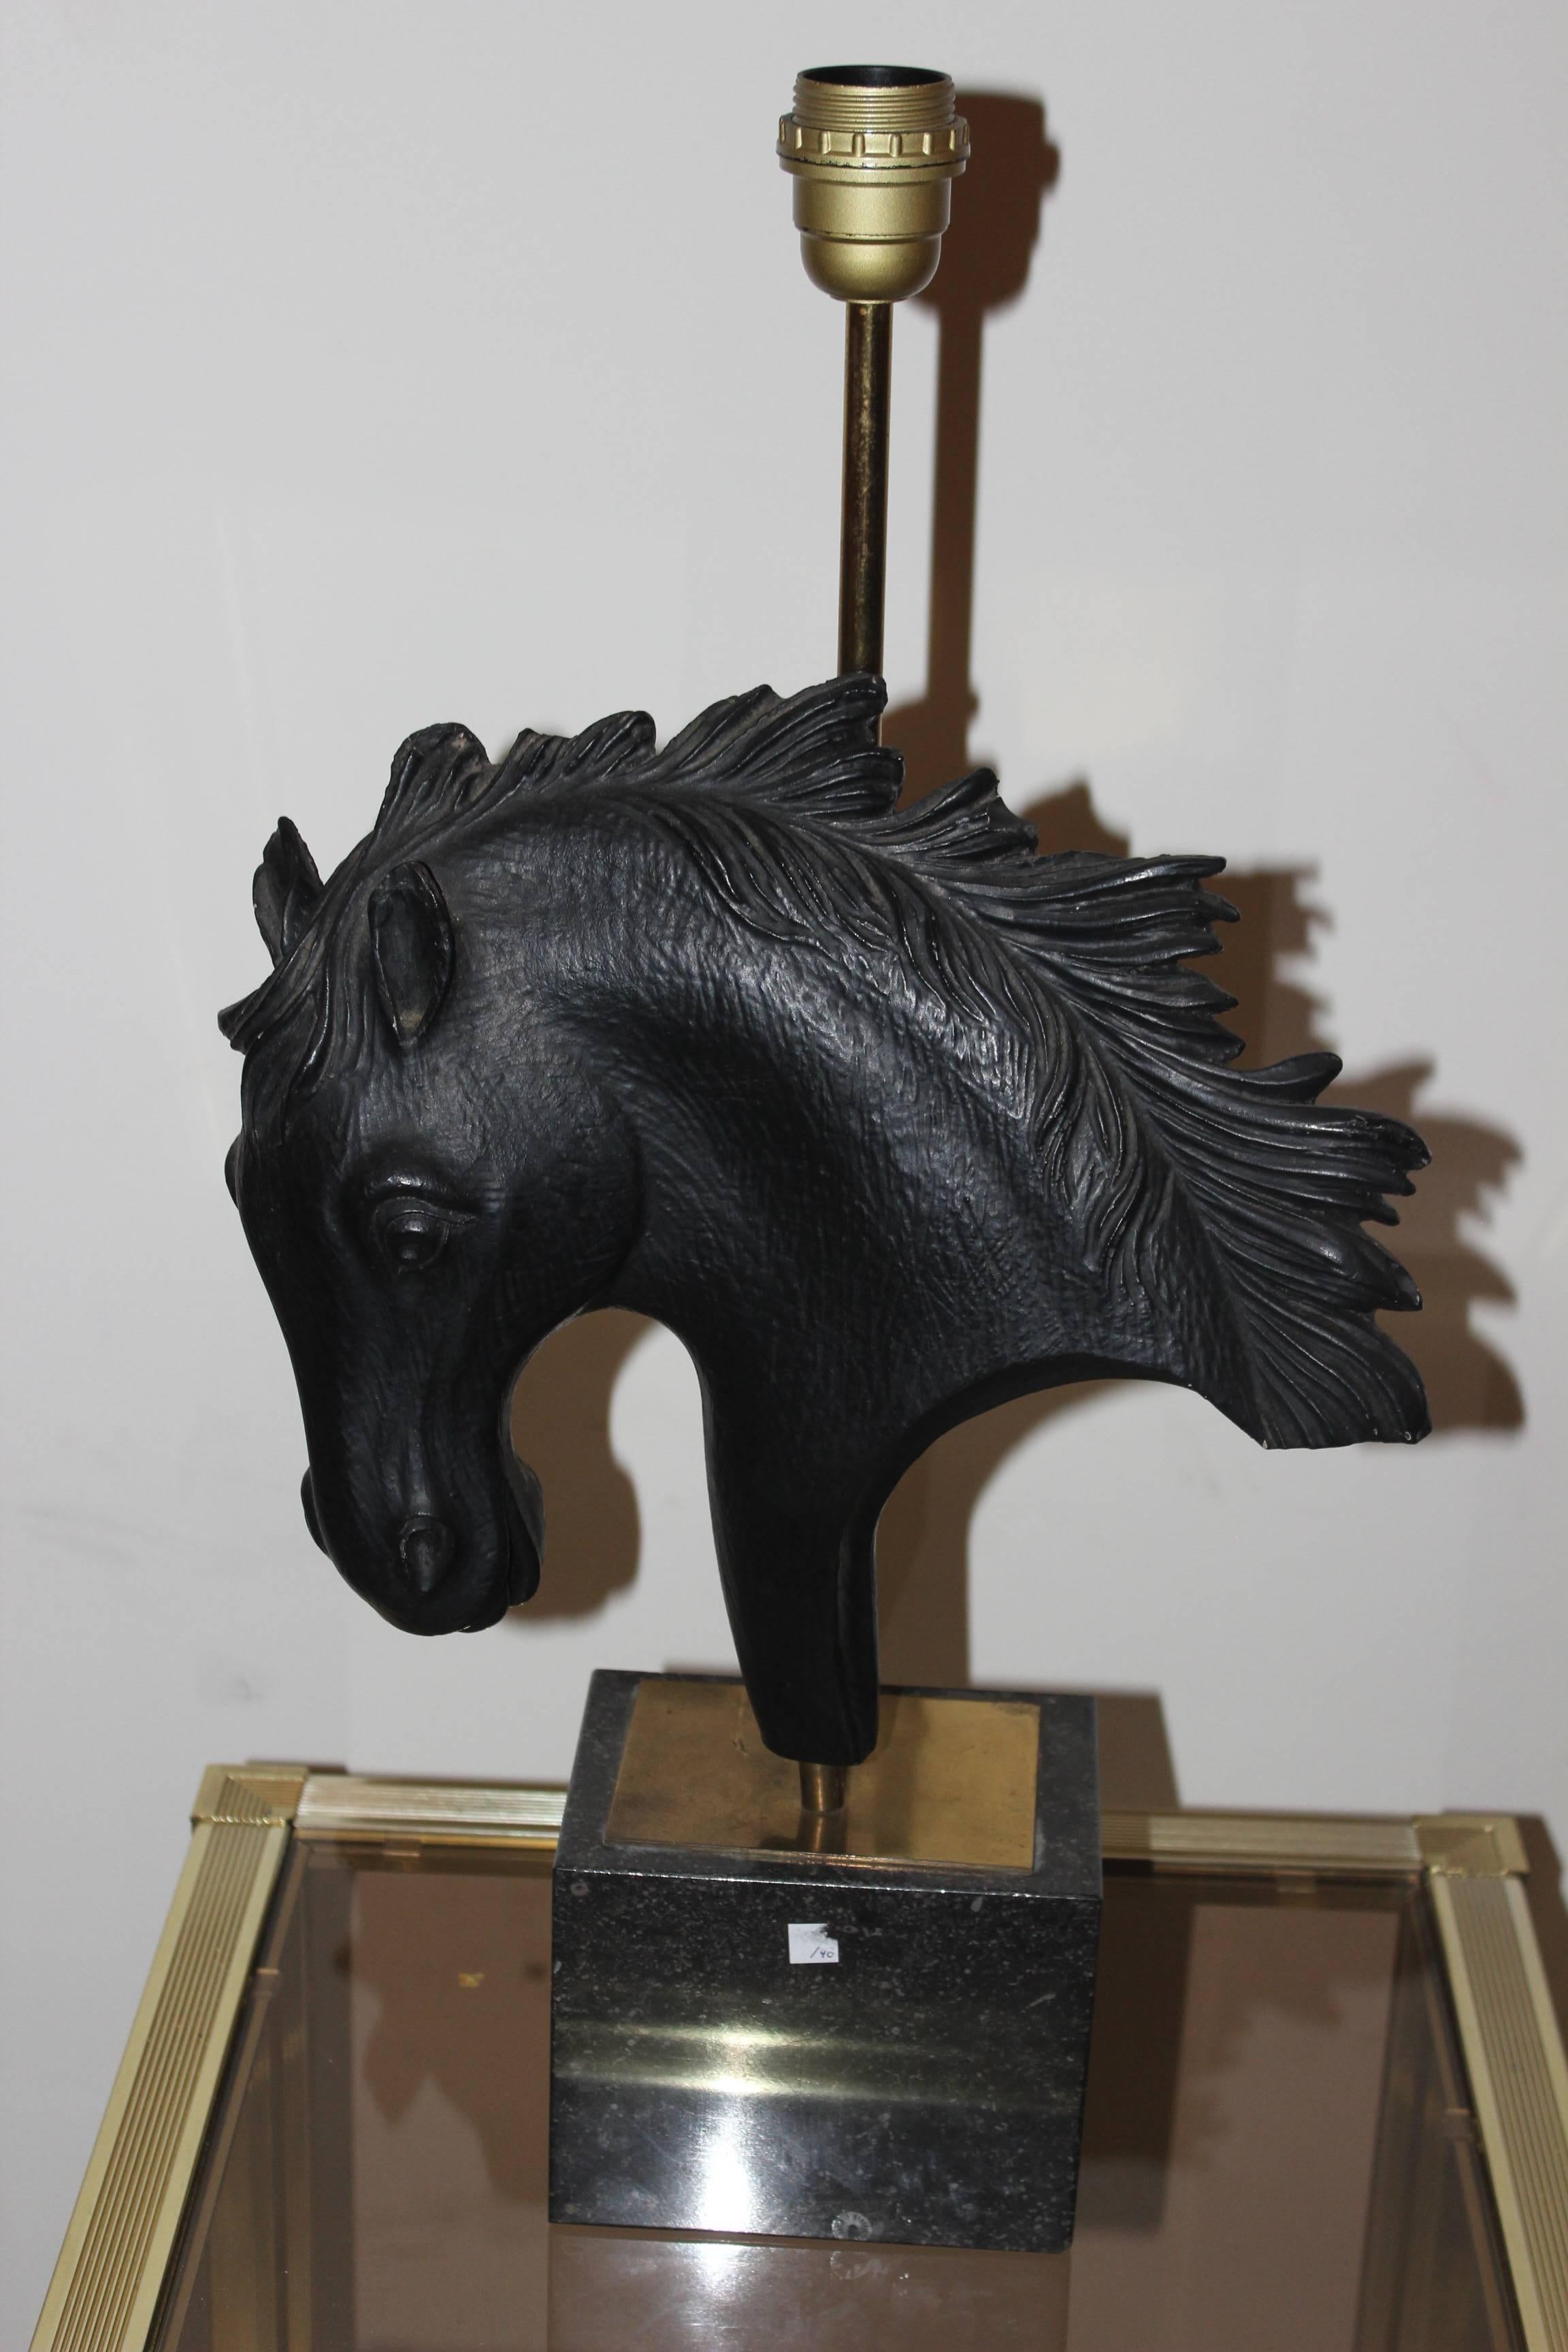 Horsehead table lamp.
The horse head table lamp is made out of Hydrocal plater, the lamp base is marble and brass, 
This lamp is also signed, 290 ARTISTICA DEPOSE.

1970s
Comes with free bulbs